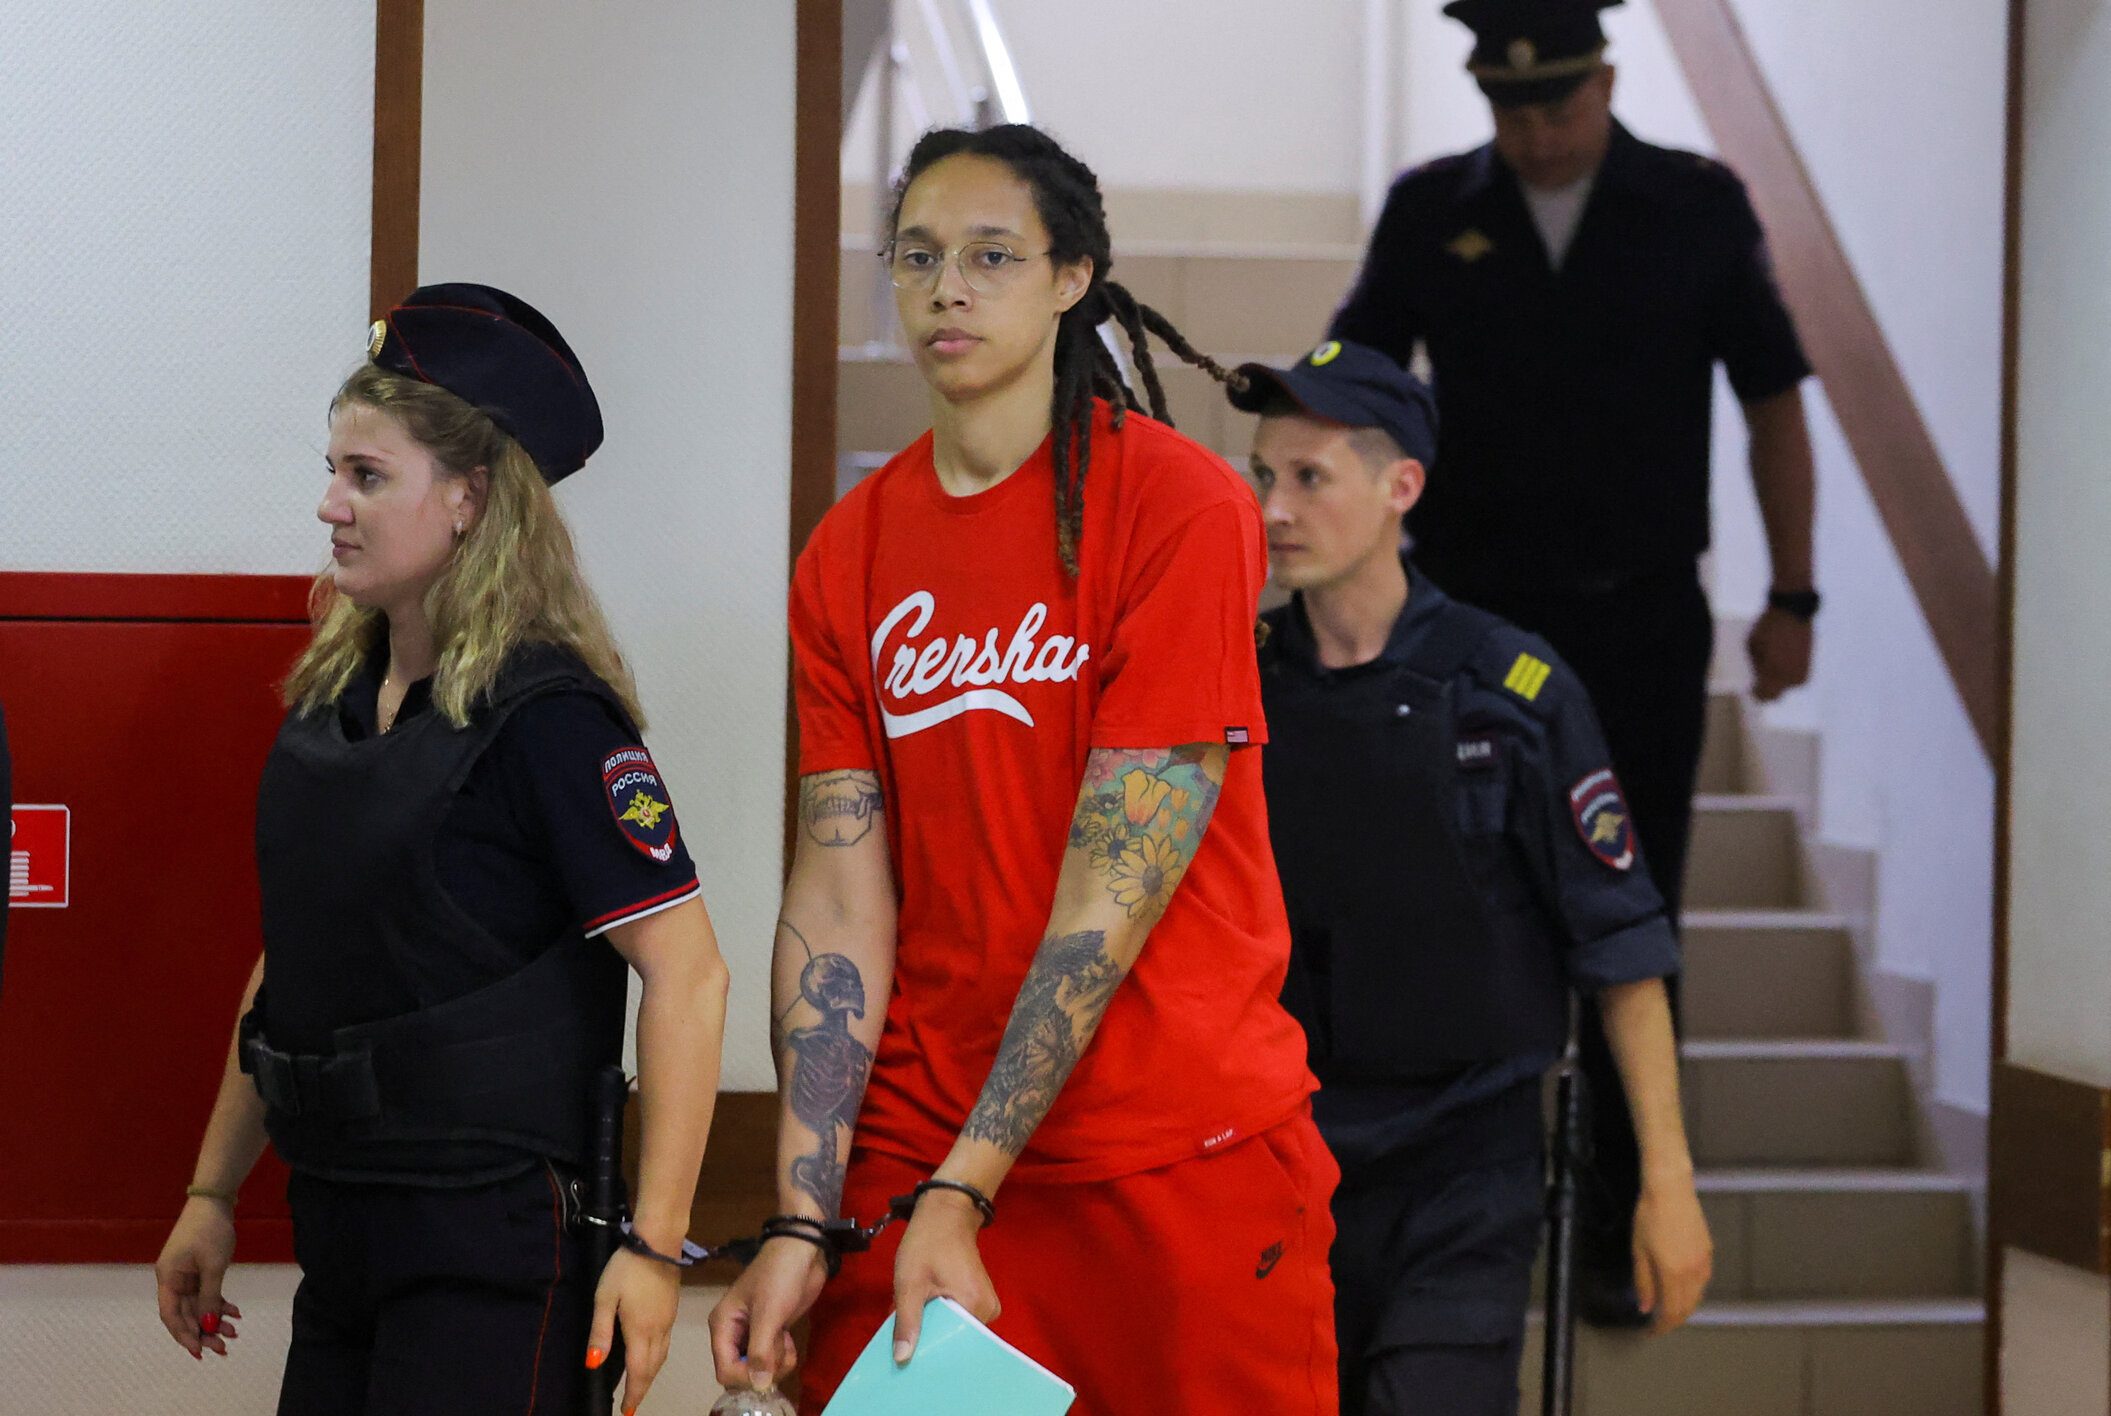 US basketball star Griner on her way to penal colony, lawyers say